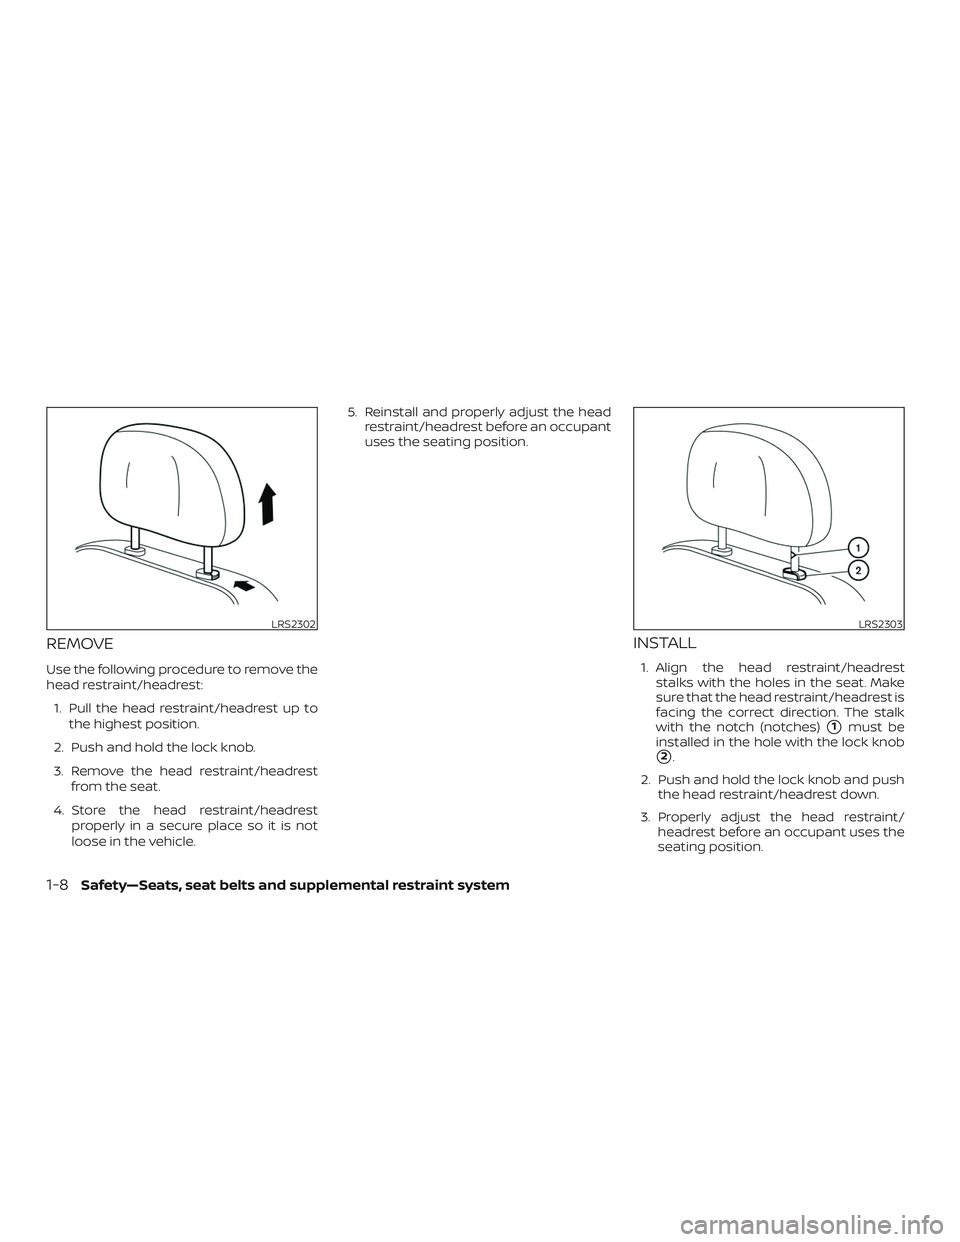 NISSAN MICRA 2023  Owners Manual REMOVE
Use the following procedure to remove the
head restraint/headrest:1. Pull the head restraint/headrest up to the highest position.
2. Push and hold the lock knob.
3. Remove the head restraint/he